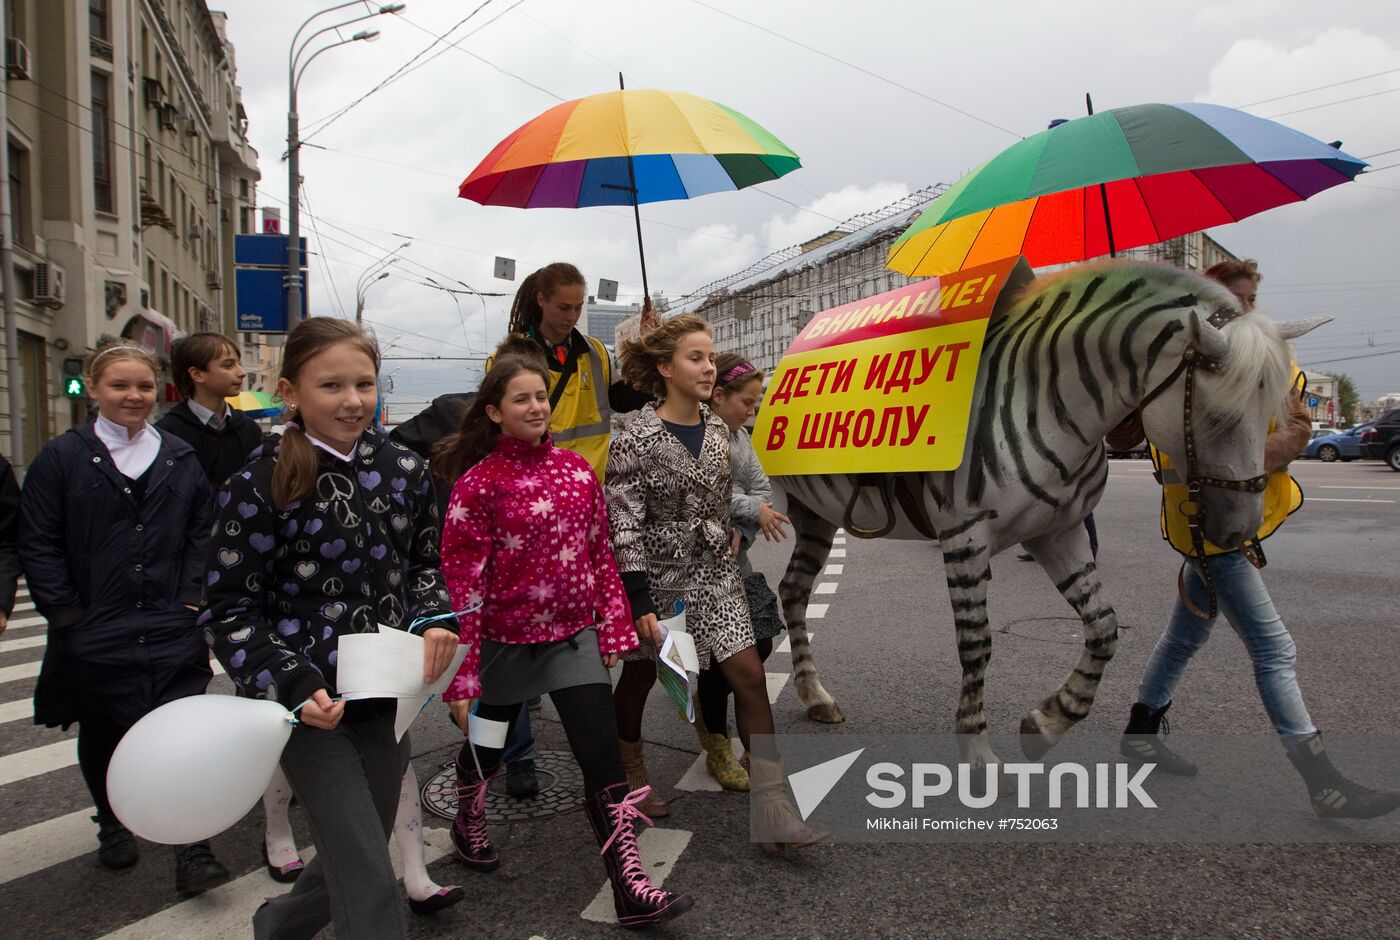 Moscow Traffic Police action "Safe Zebra Crossings"